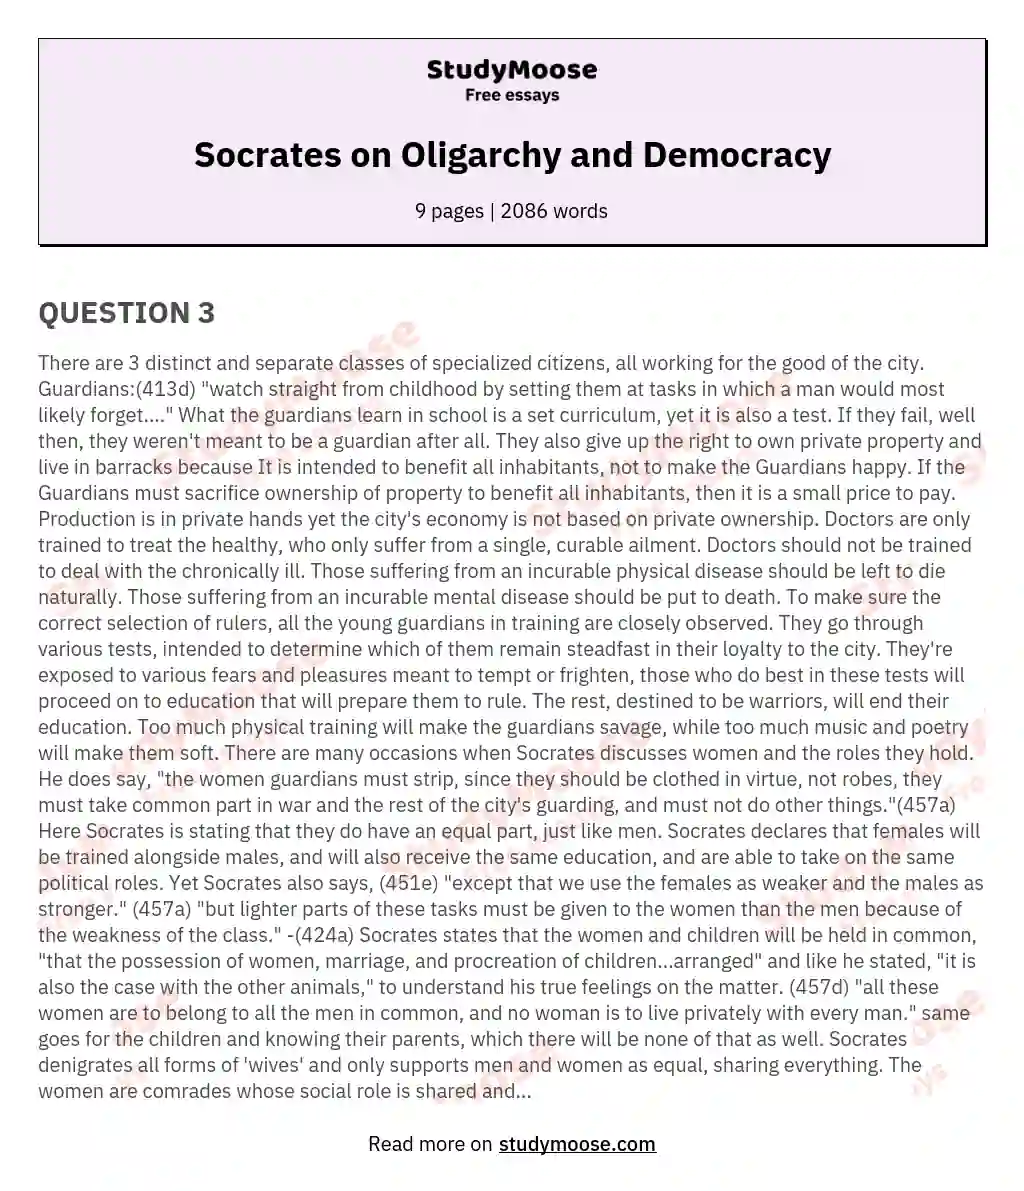 Socrates on Oligarchy and Democracy essay